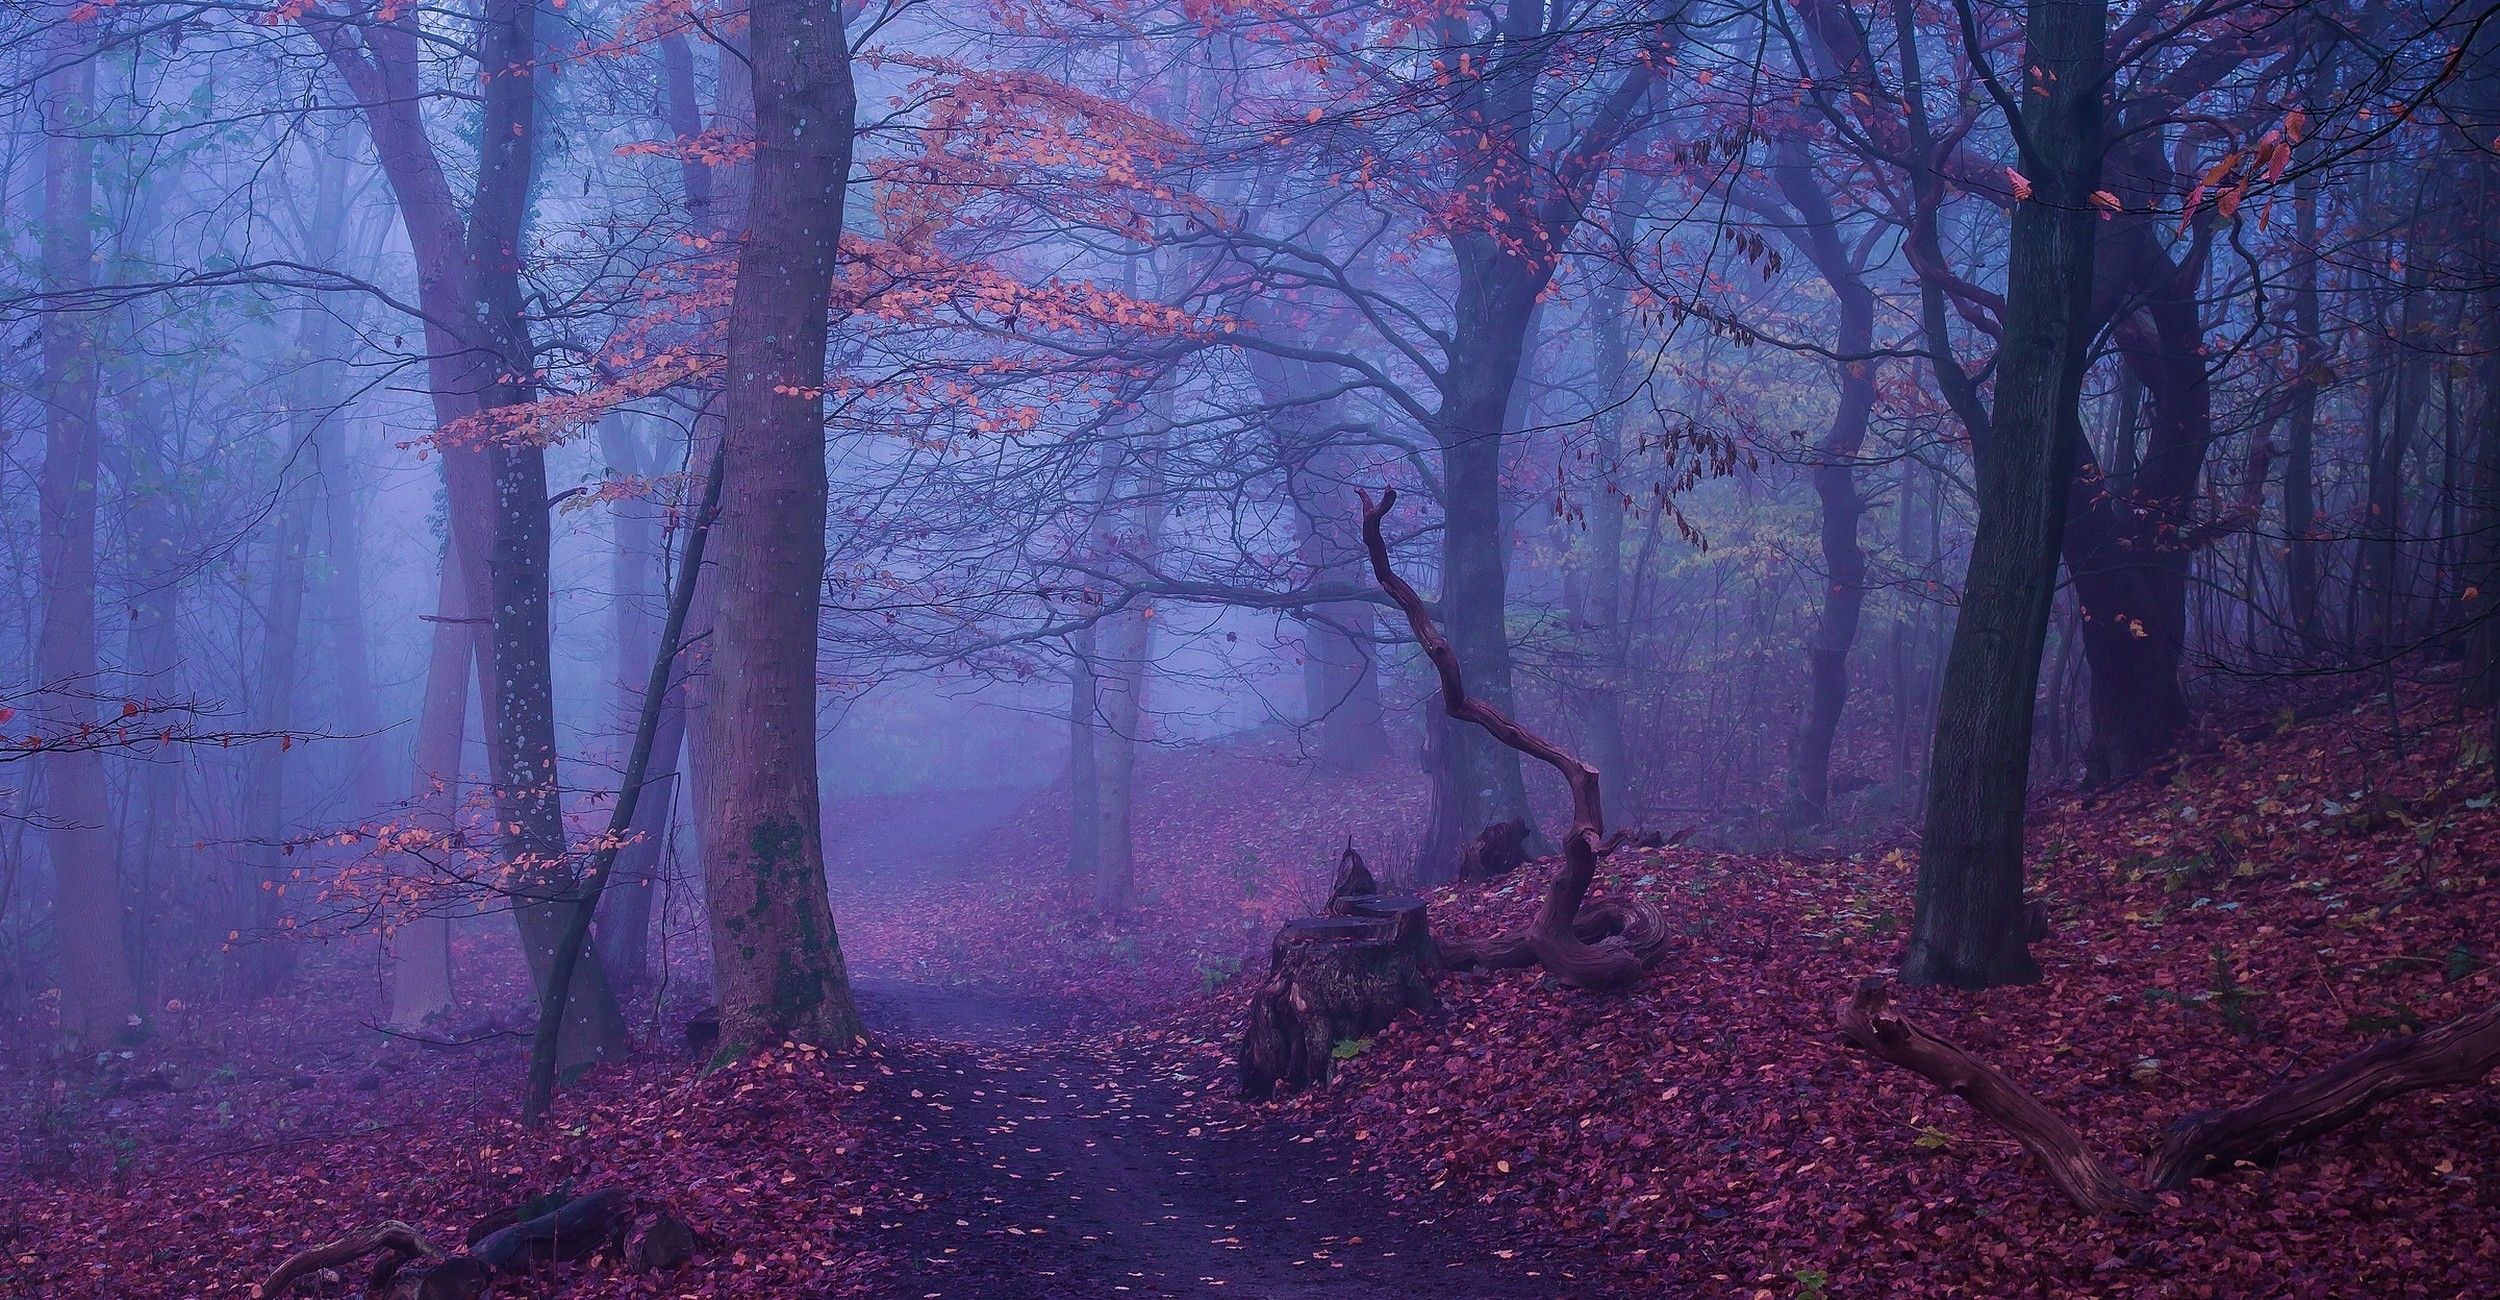 A path through the woods in fog - Woods